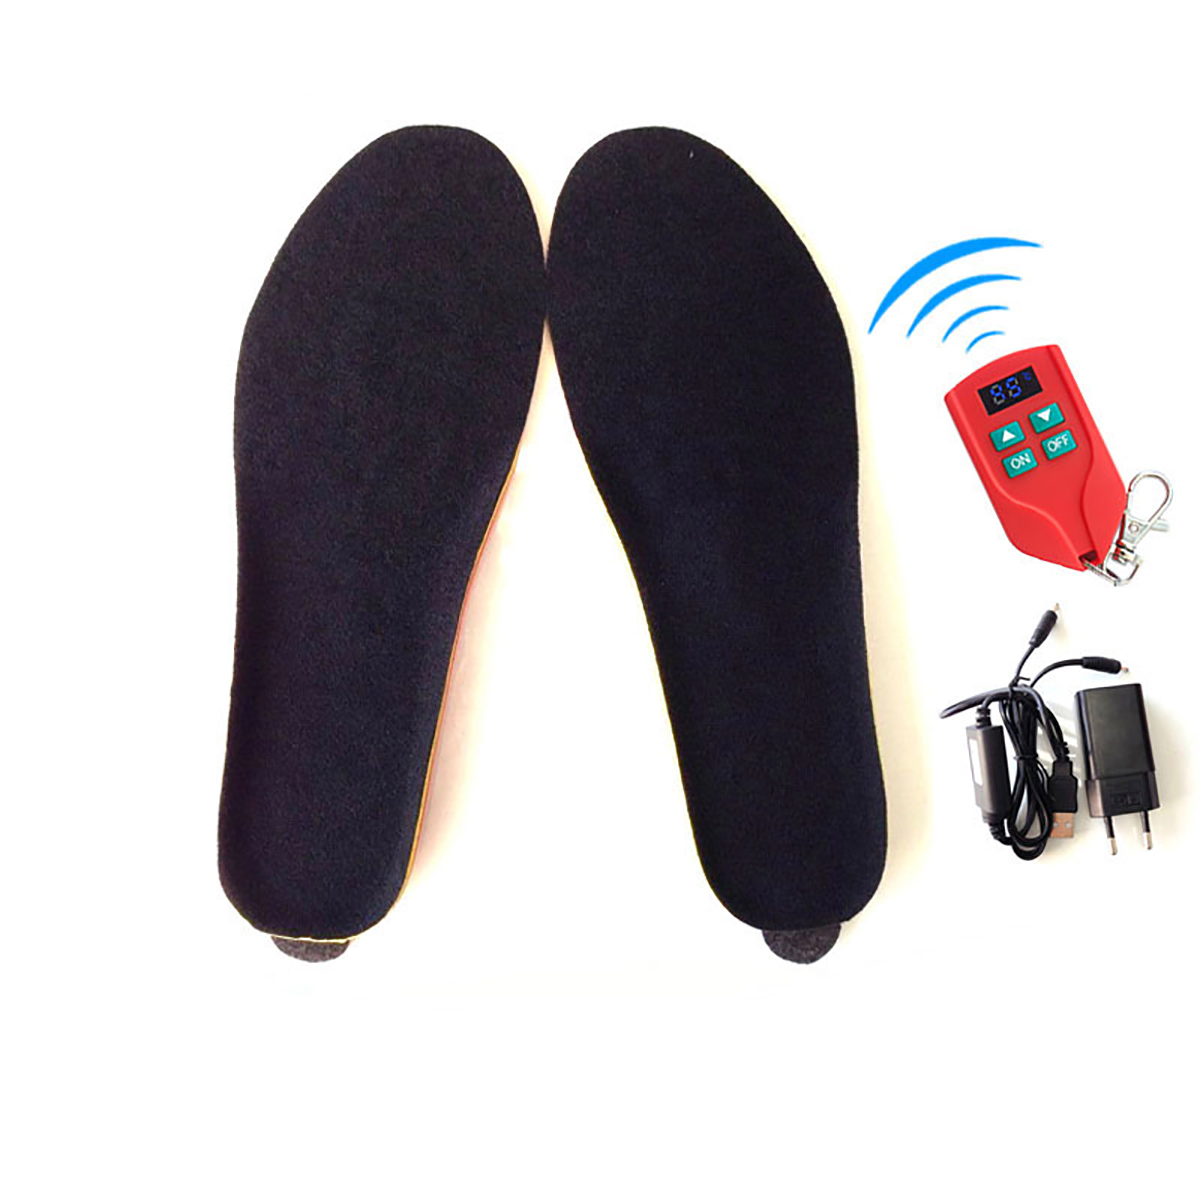 2000mAh Rechargeable Battery Wireless Heated Insole Winter Portable Shoe Boot Foot Warmer 41-46 Code от Banggood WW